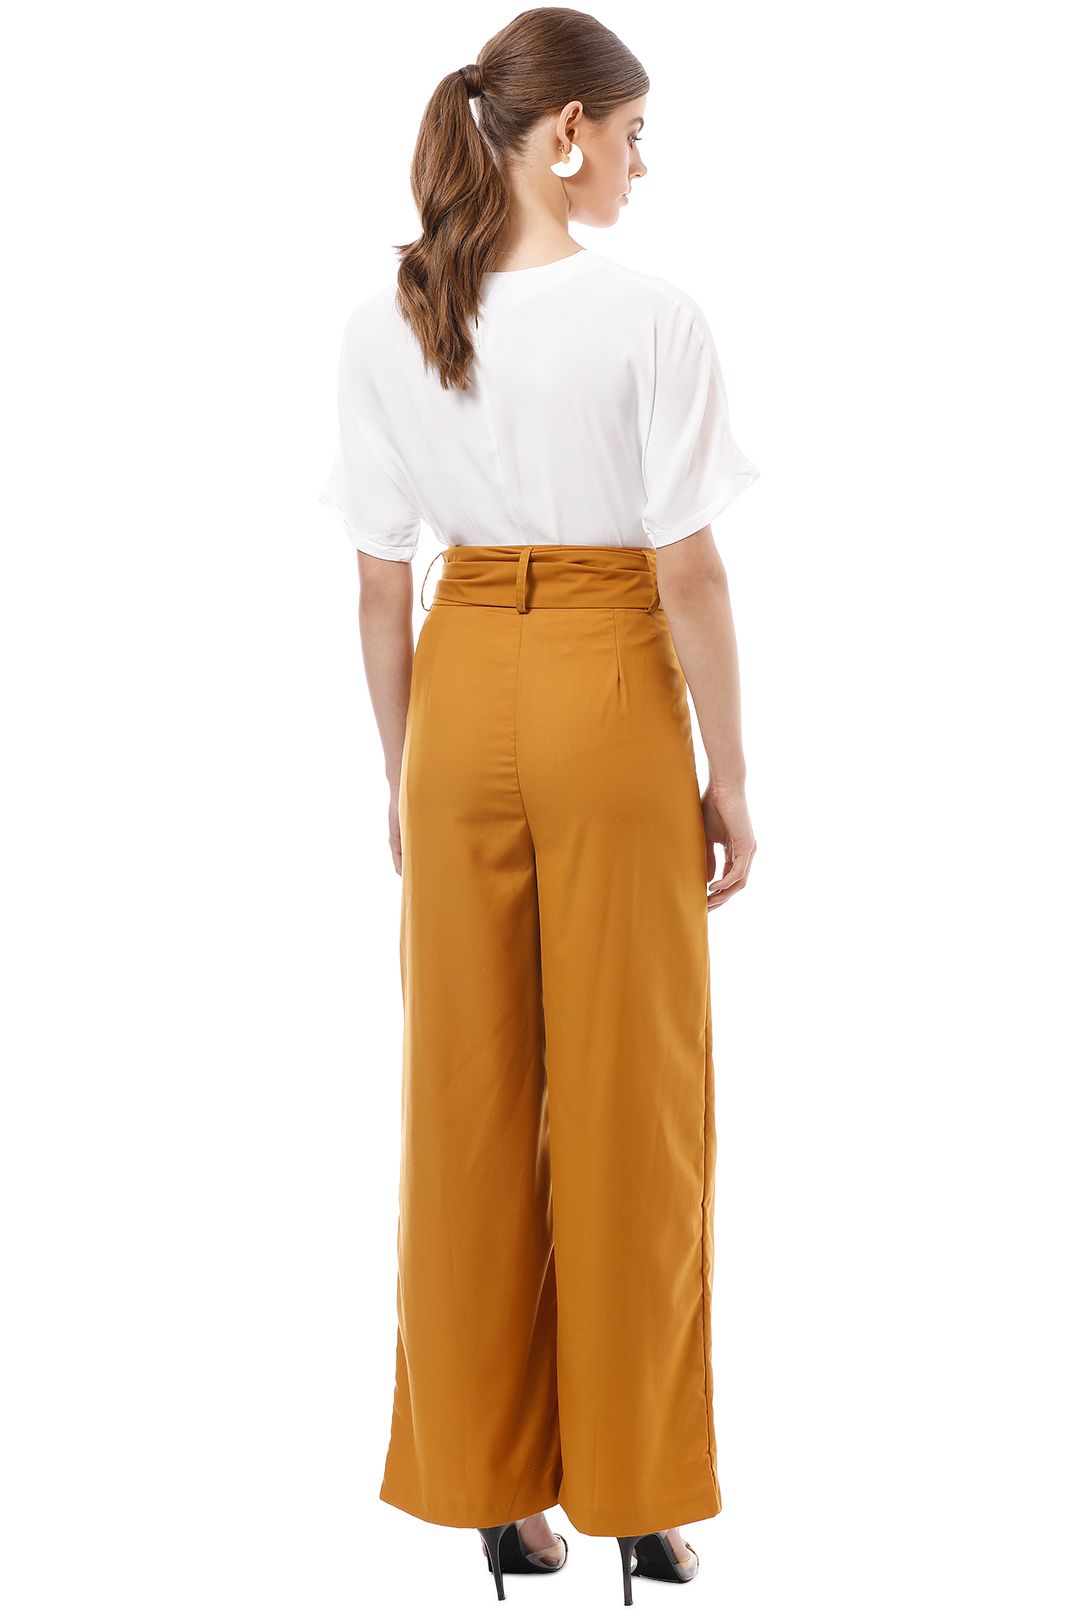 CMEO Collective - The Moments Pant - Yellow - Back